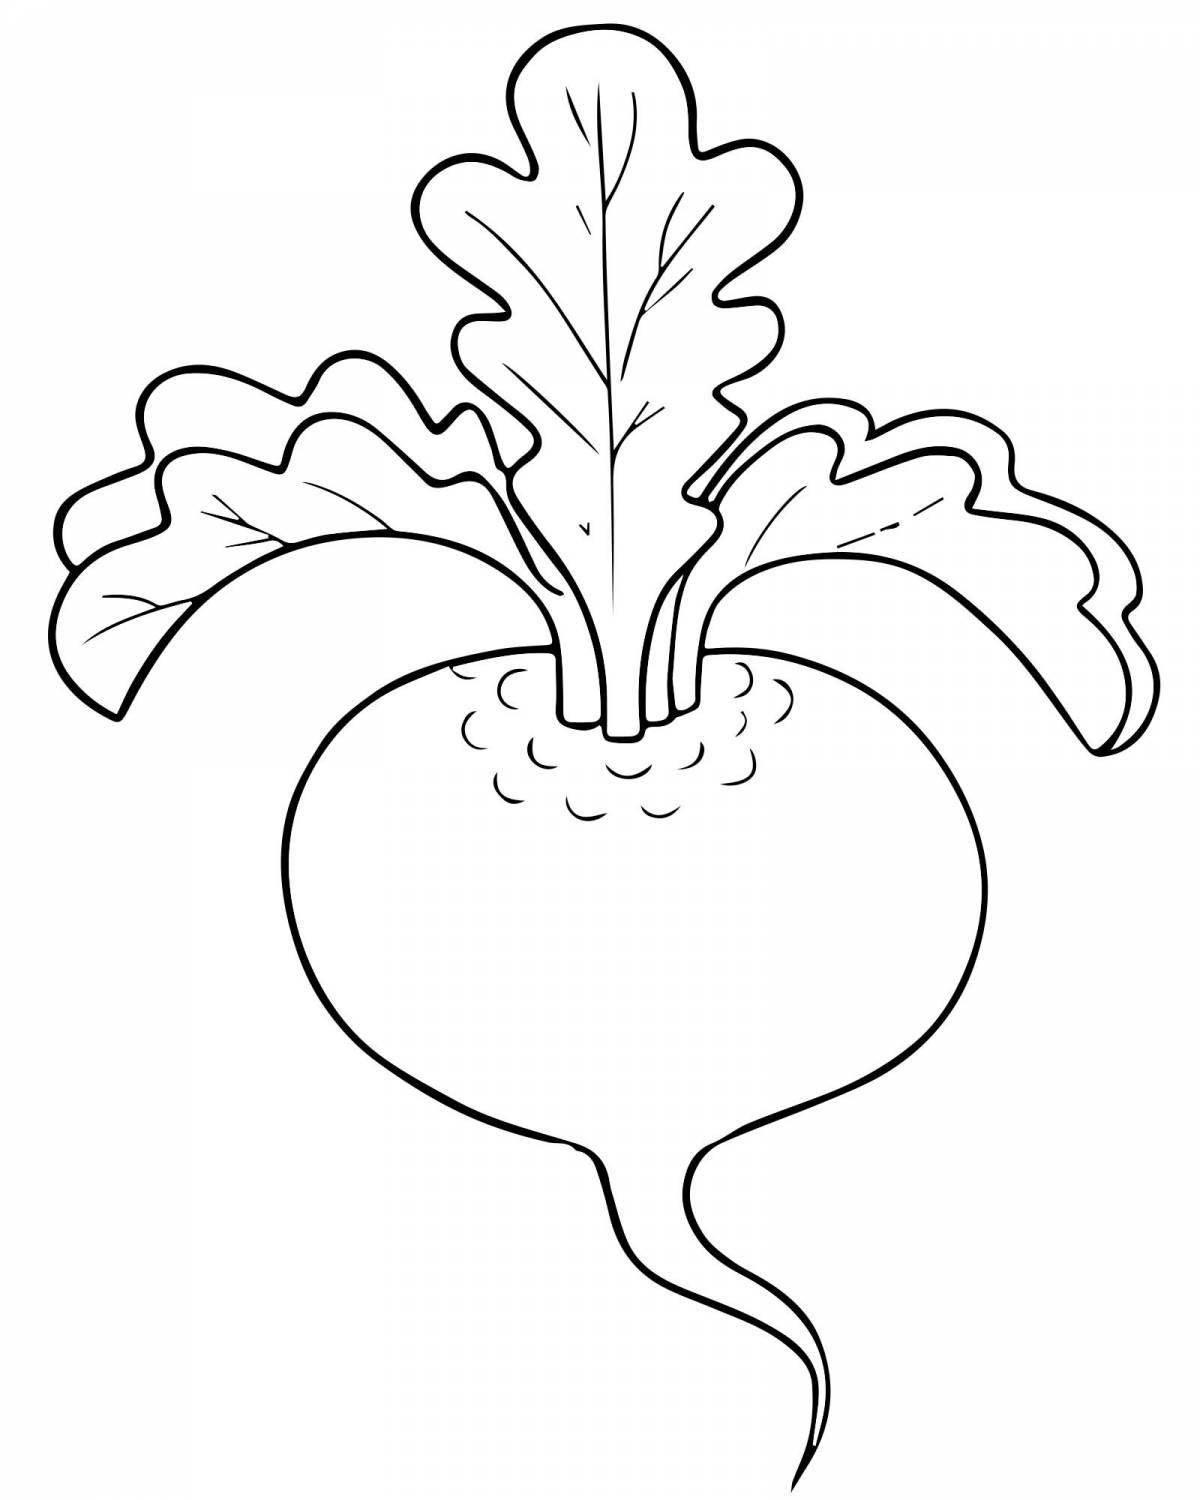 Cute beetroot coloring book for kids